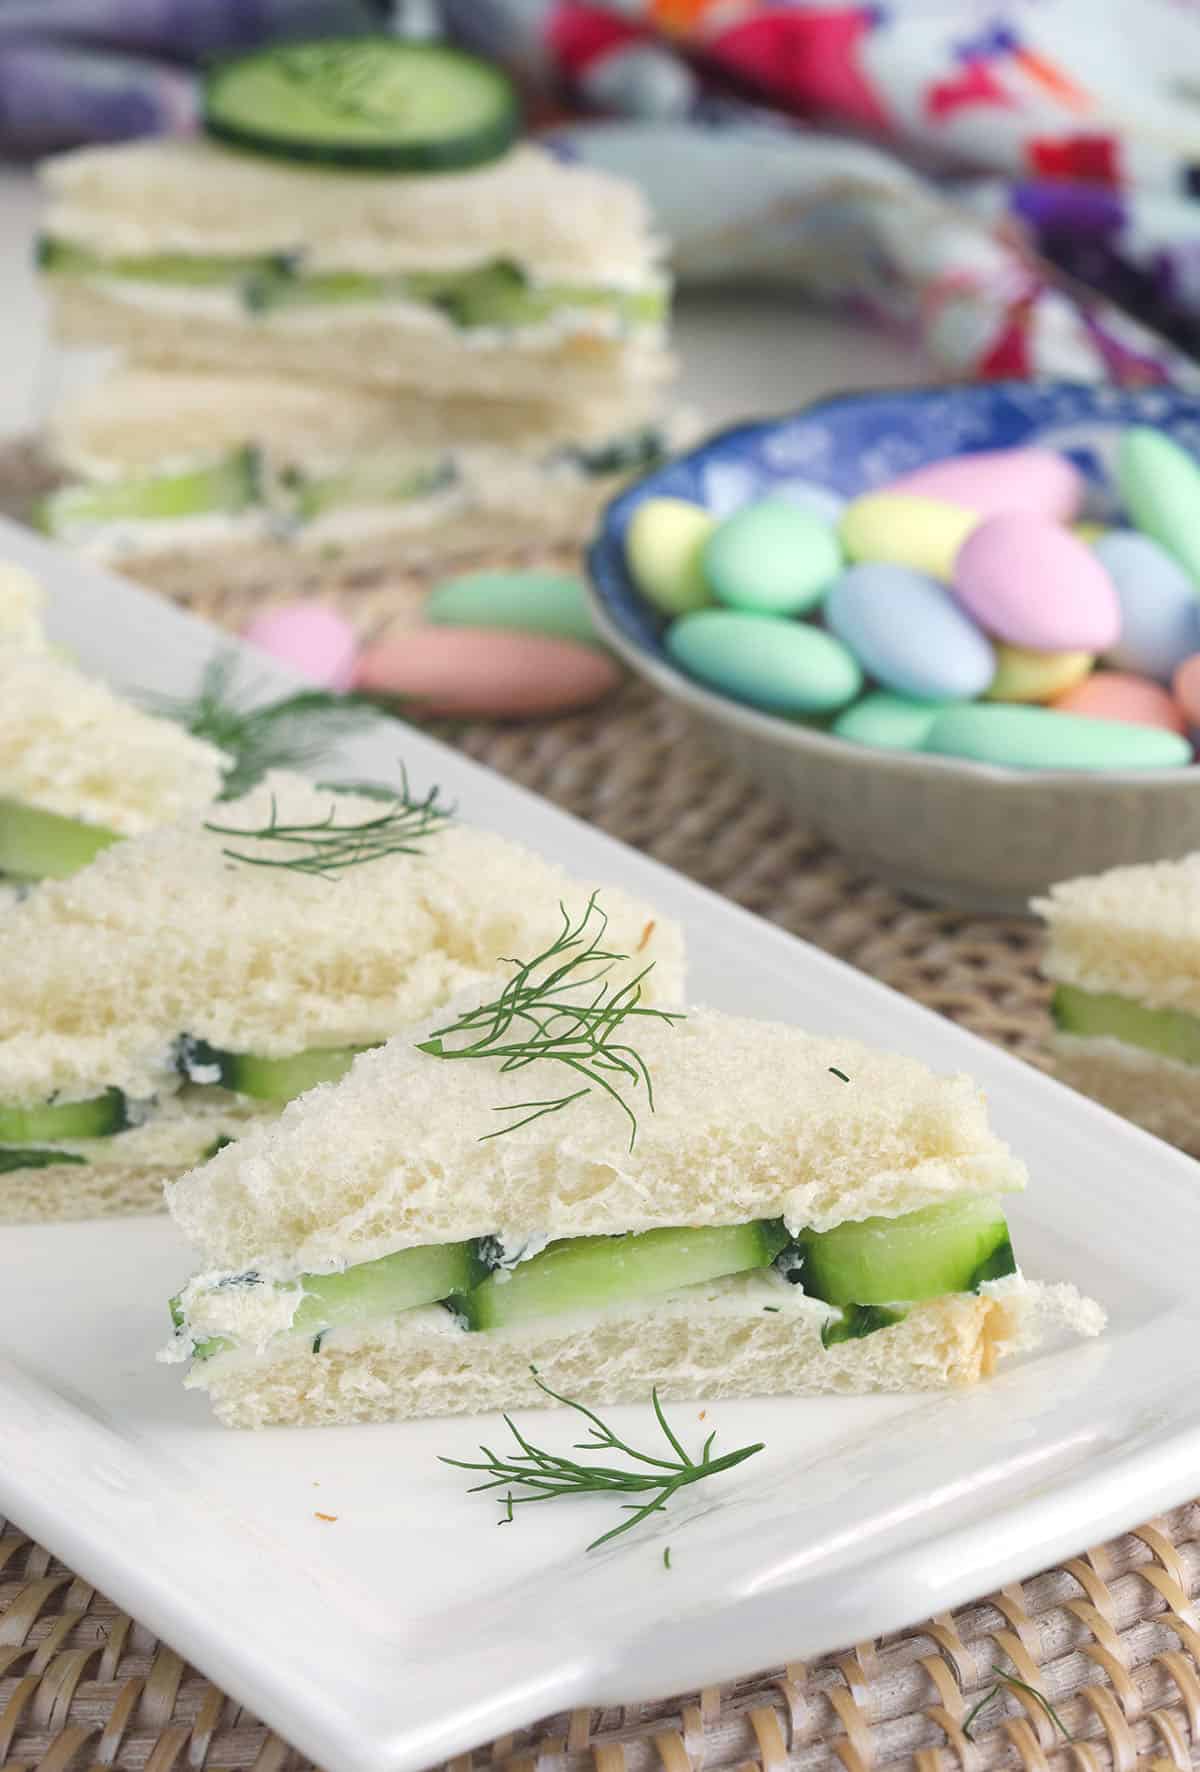 Cucumber sandwiches are garnished with fresh dill. 